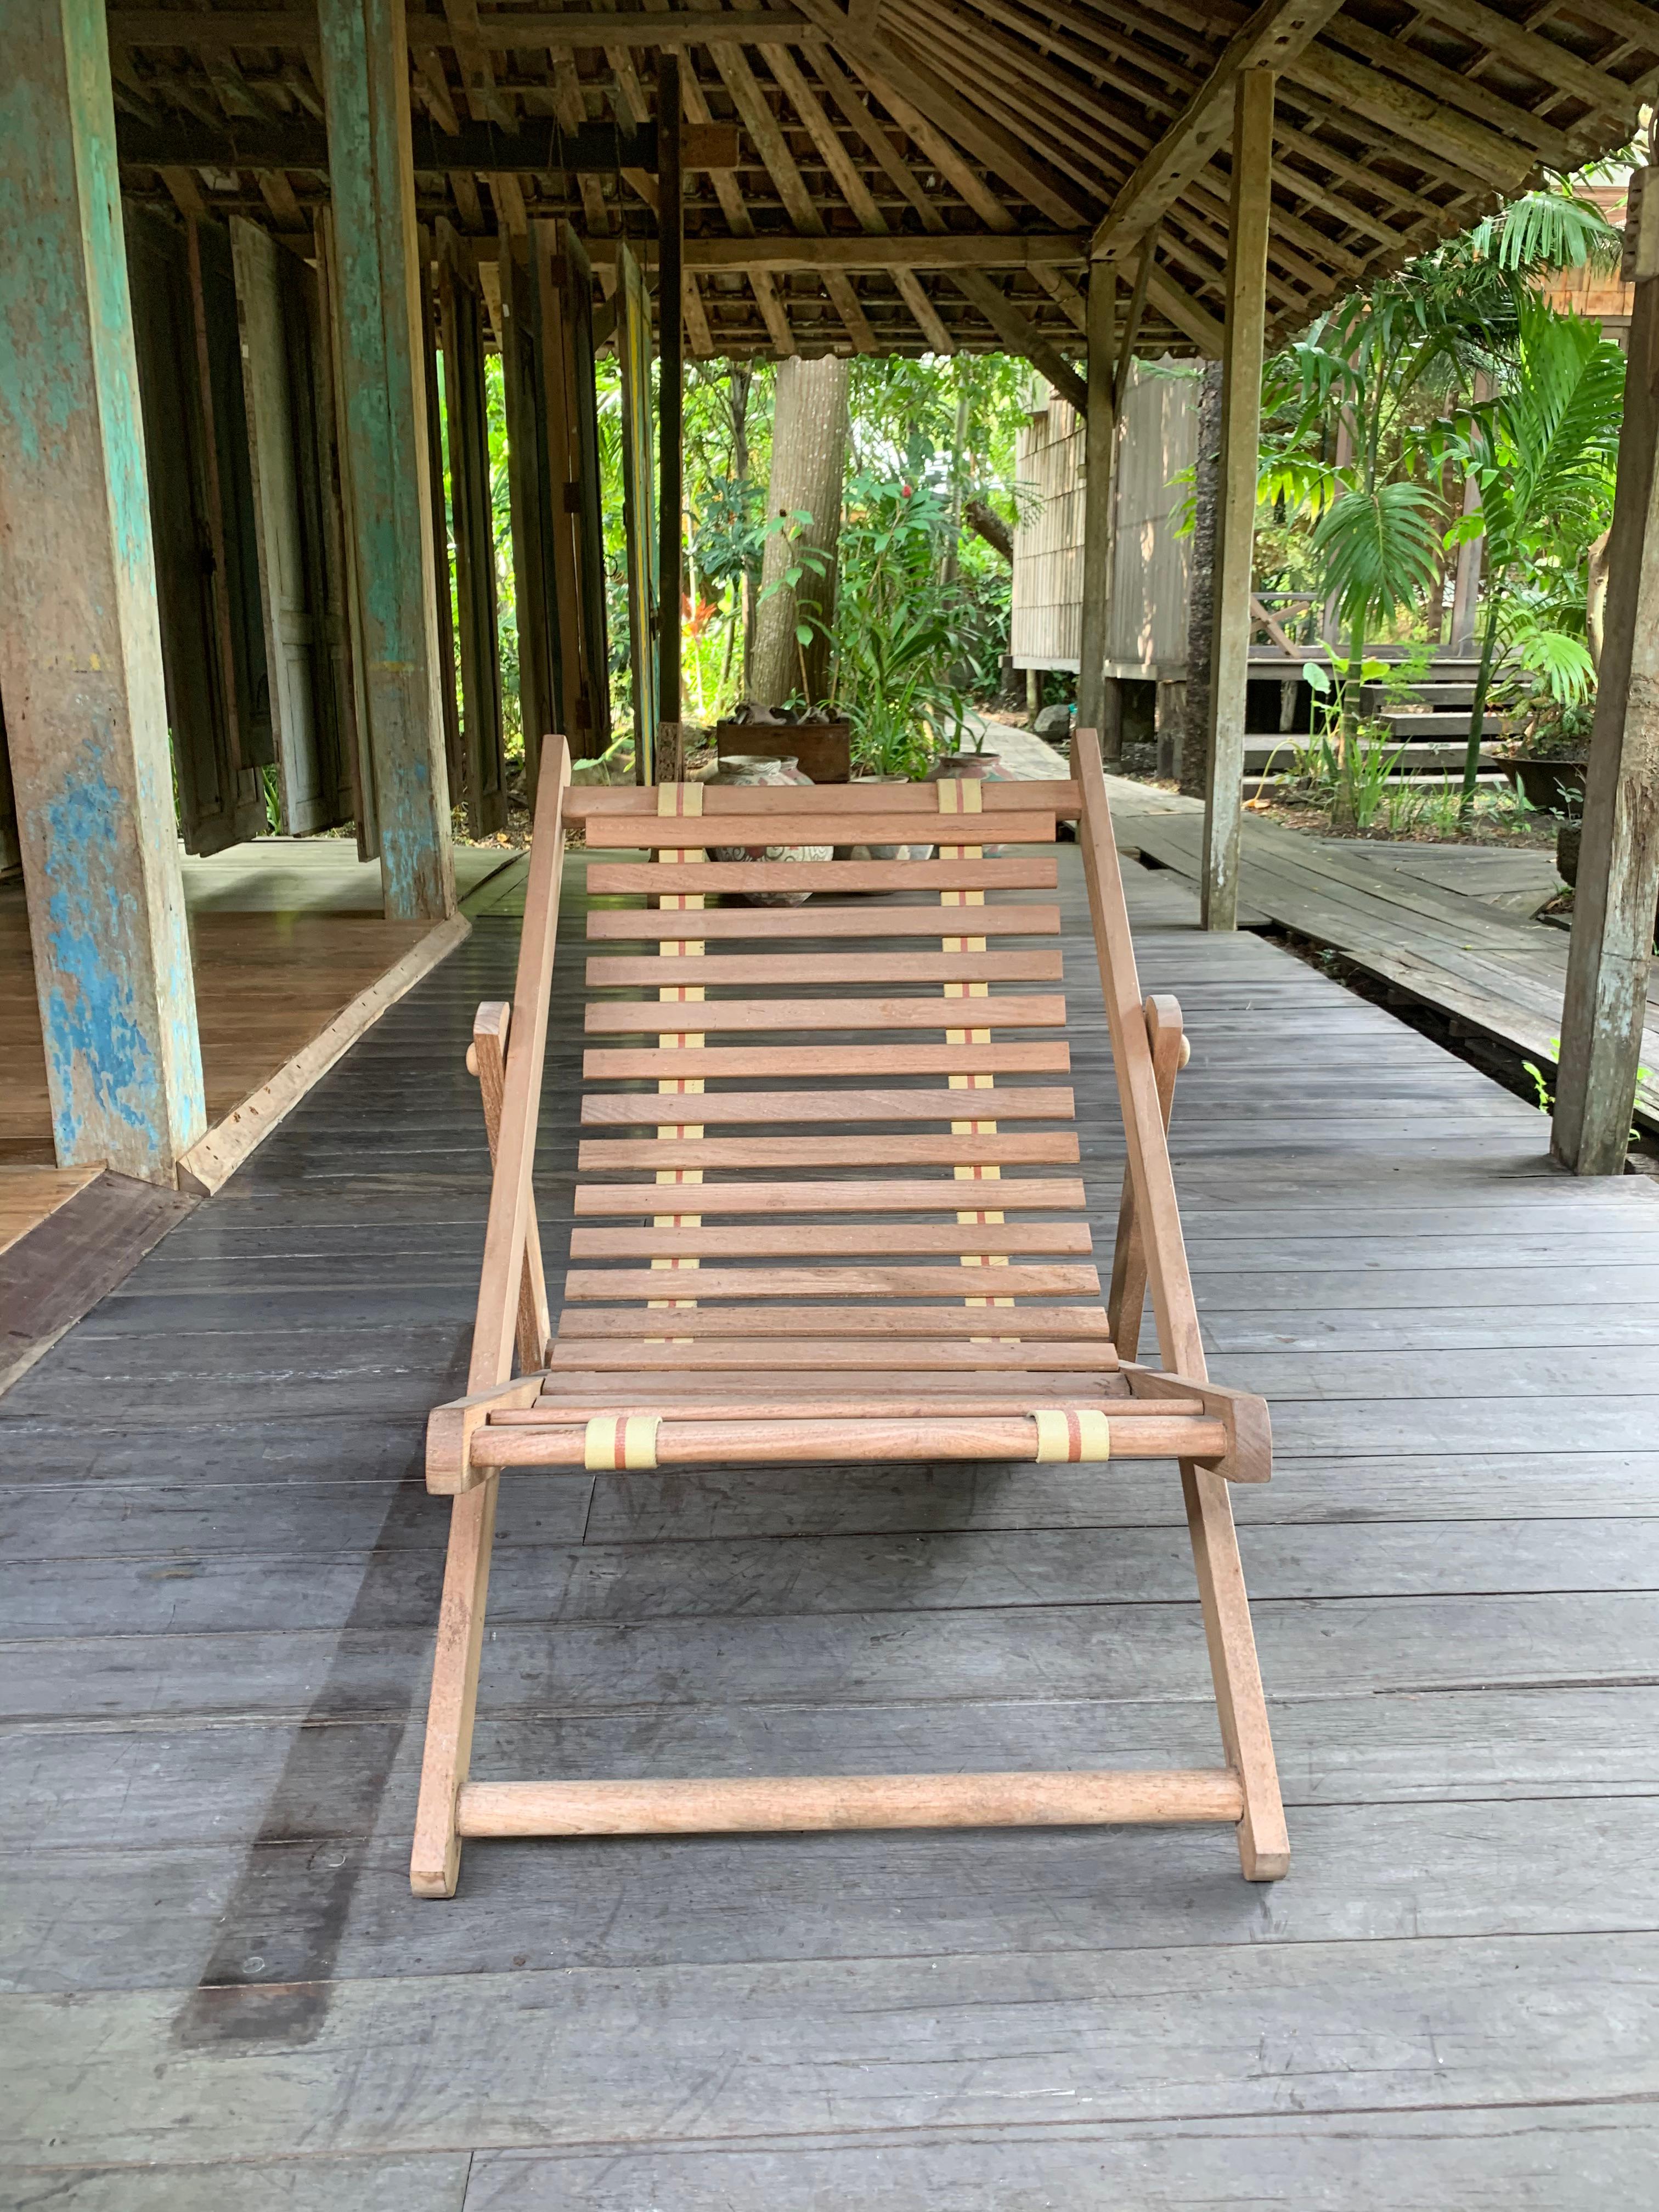 A hand-crafted, foldable teak lounger chair. These chairs are crafted by local artisans and features a subtle, smooth finished wood texture. The straps which hold the horizontal wooden strats of the seat are secured by two reclaimed motor belts from